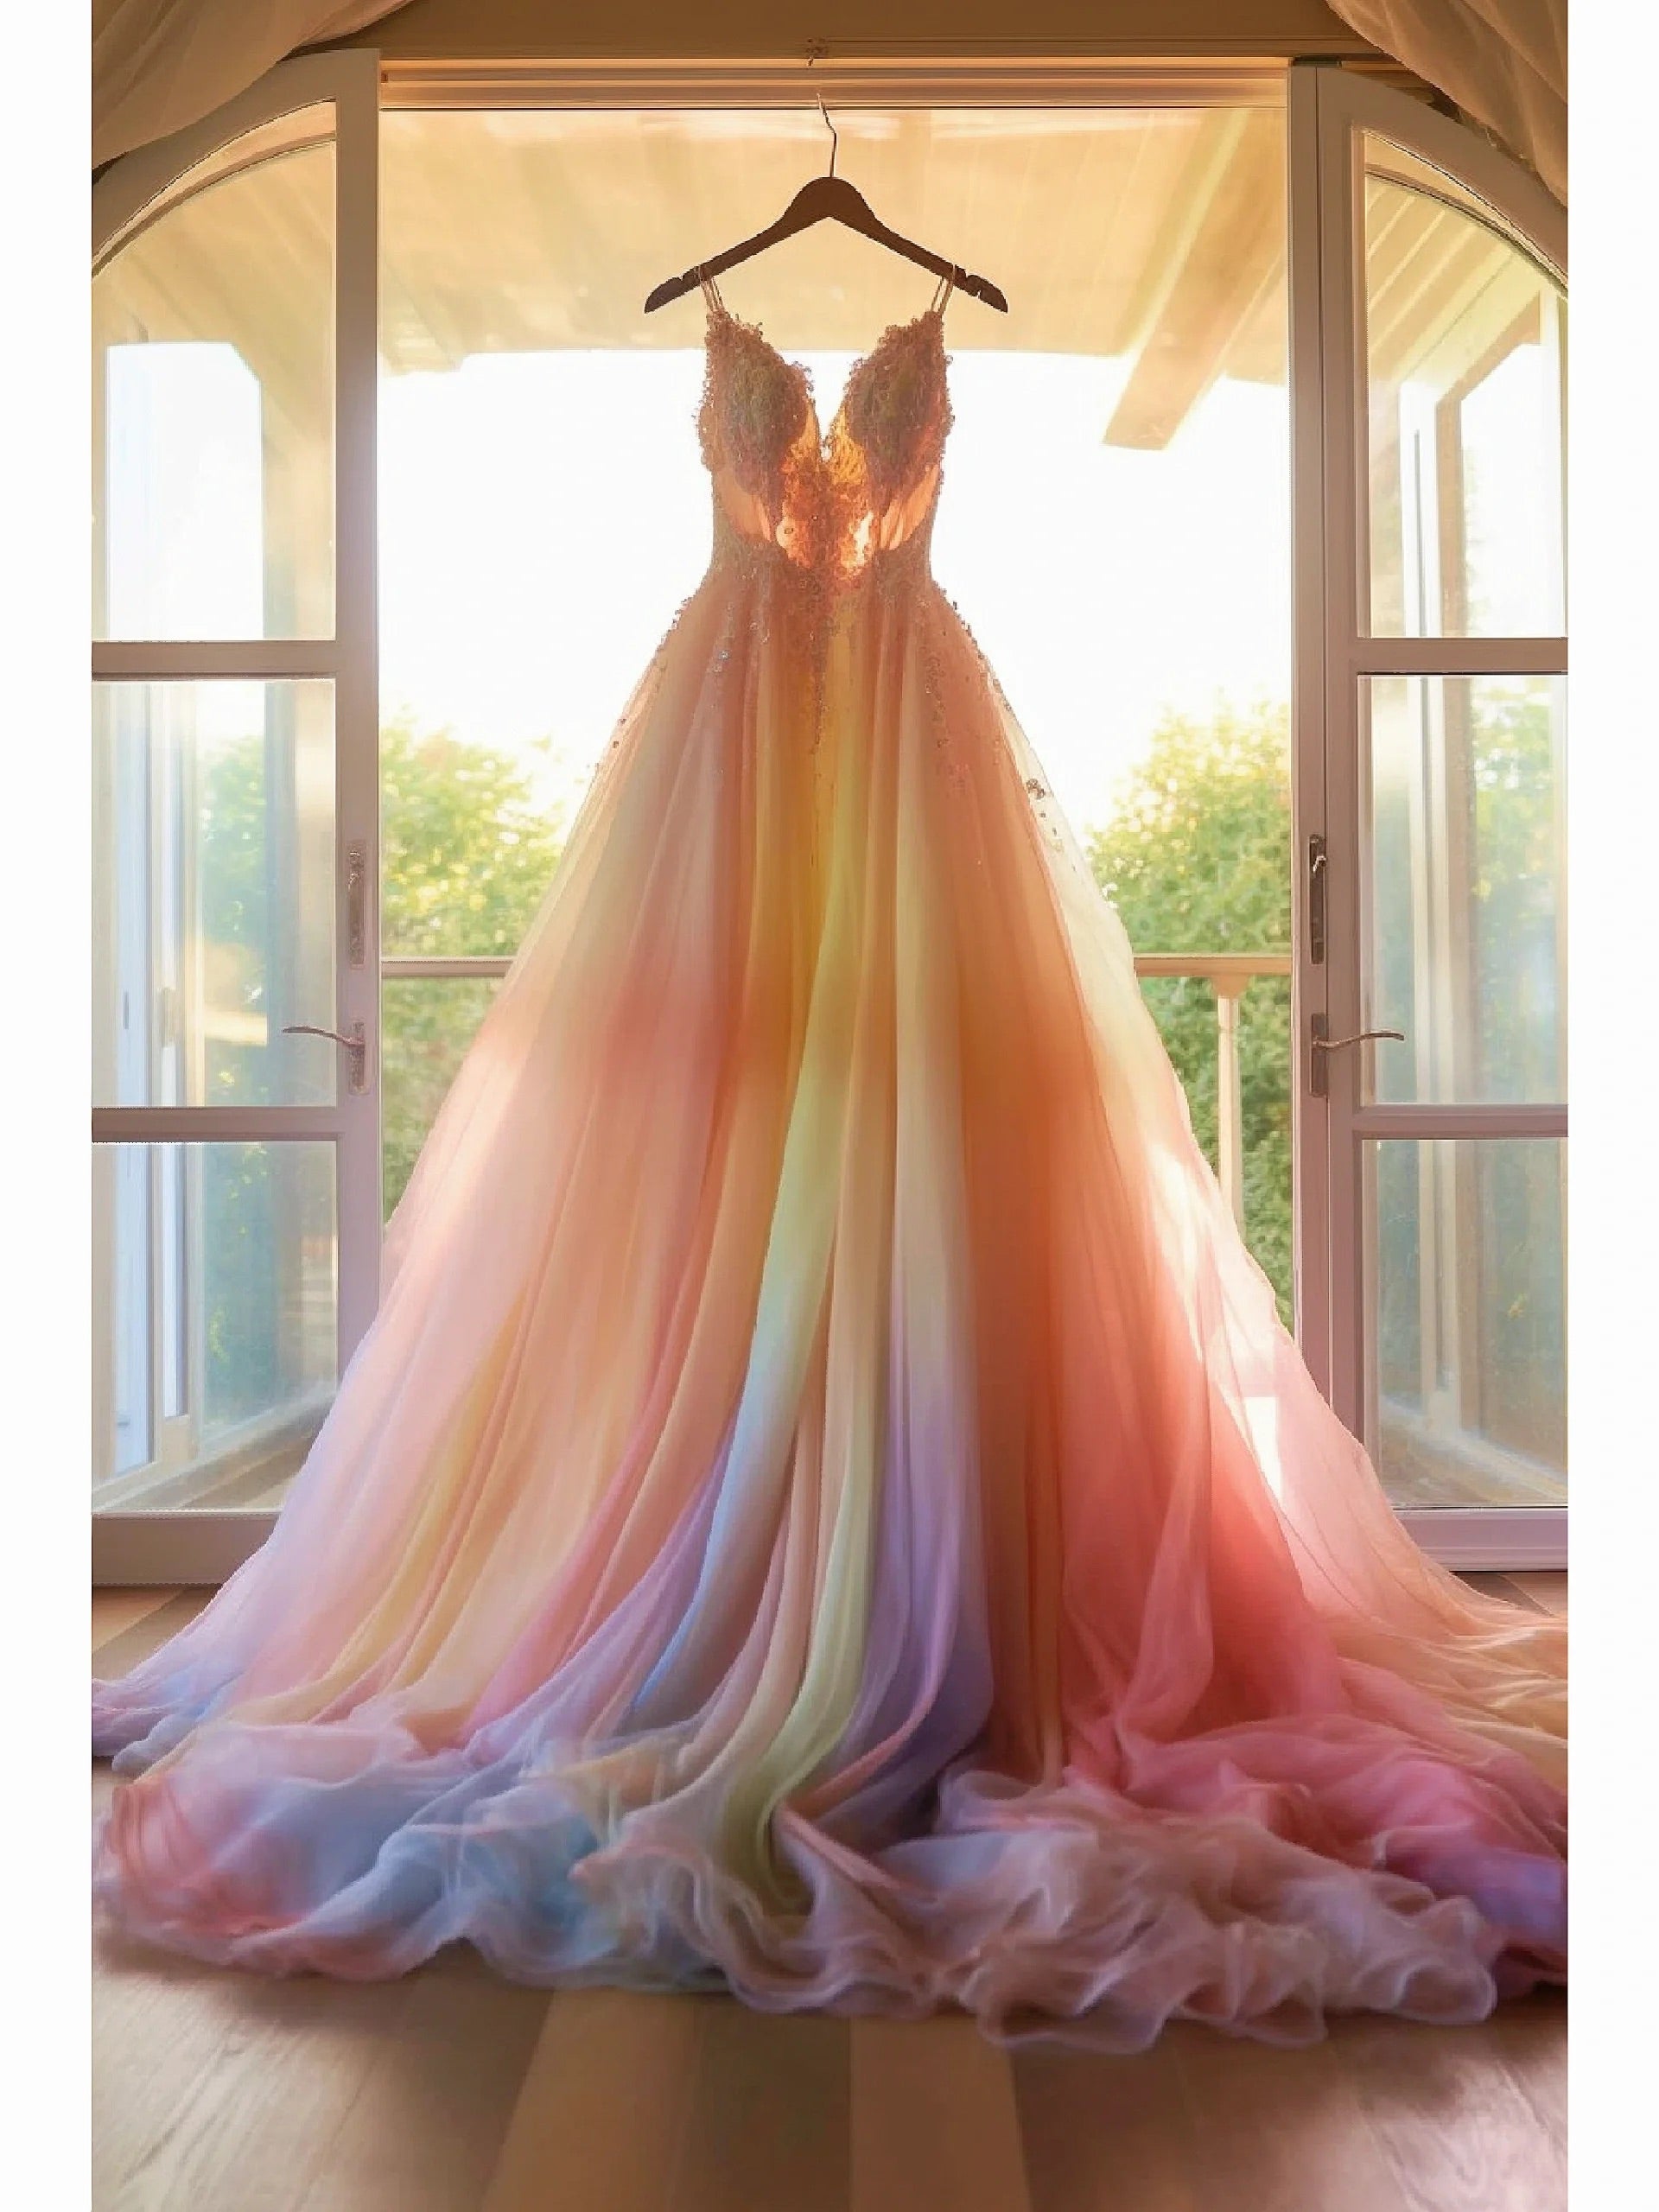 A Pastel Lace Wedding Gown For This Sophisticated Rainbow